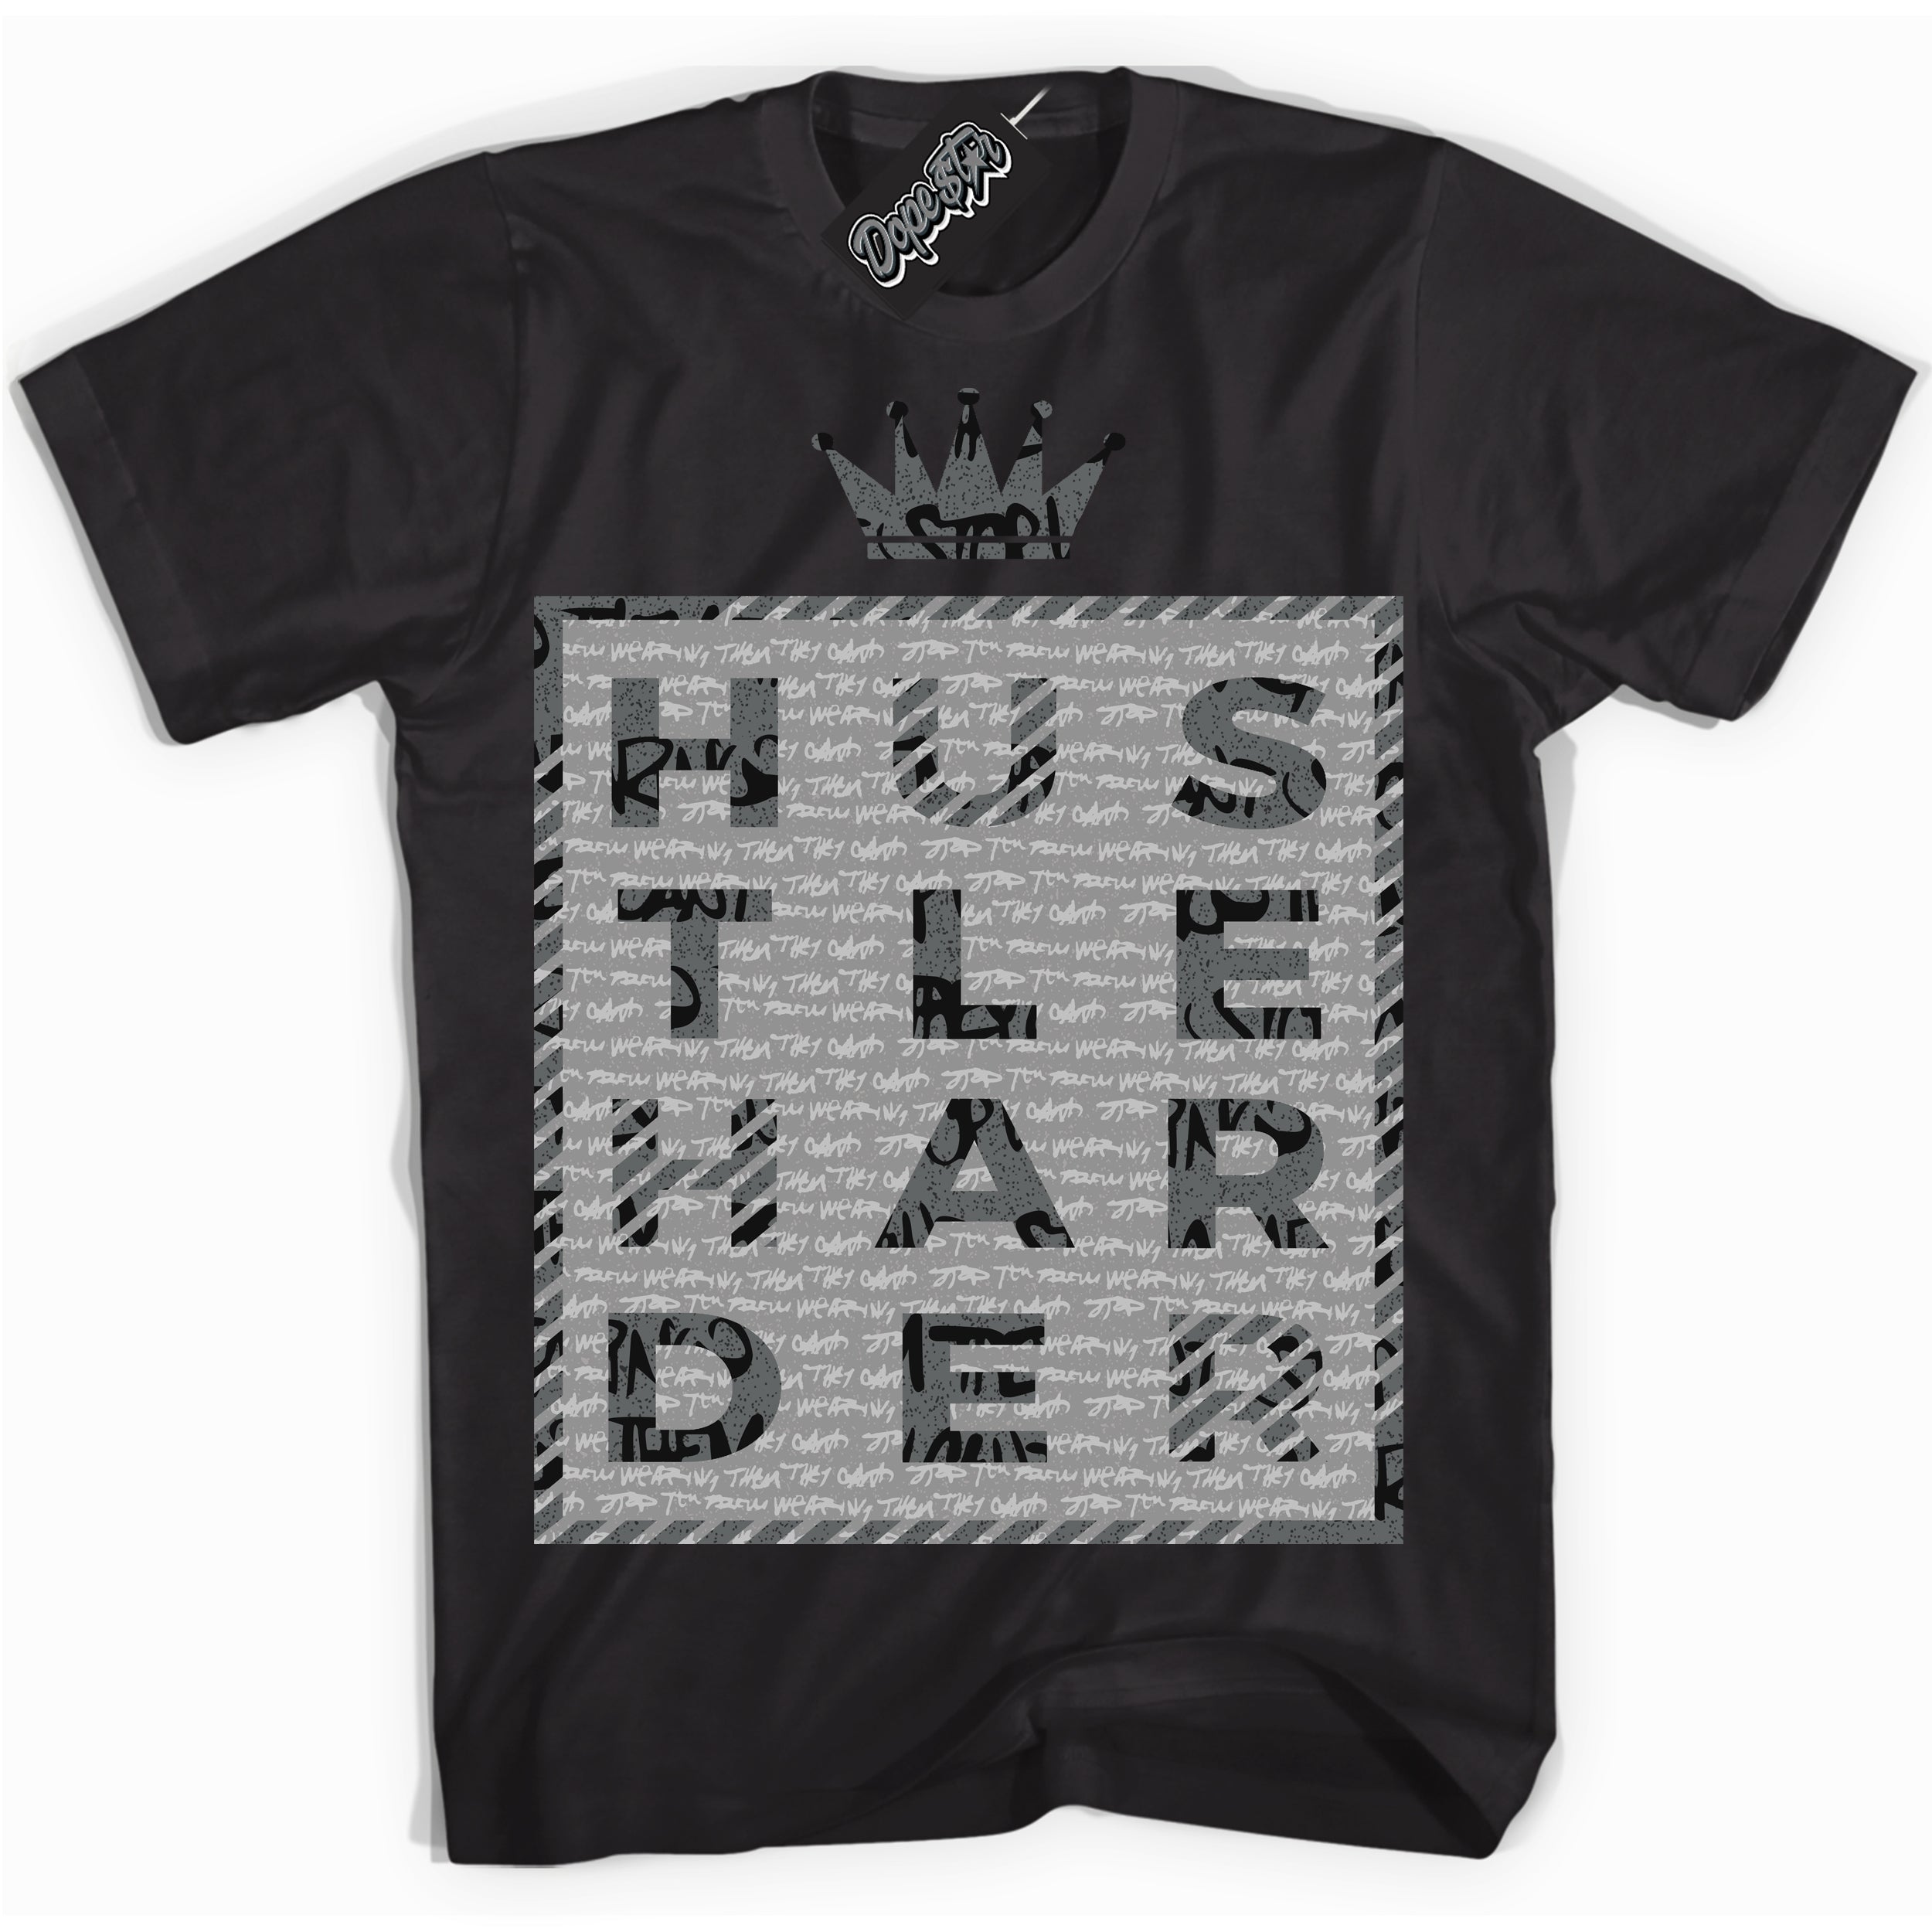 Cool Black Shirt with “ Hustle Harder ” design that perfectly matches Rebellionaire 1s Sneakers.